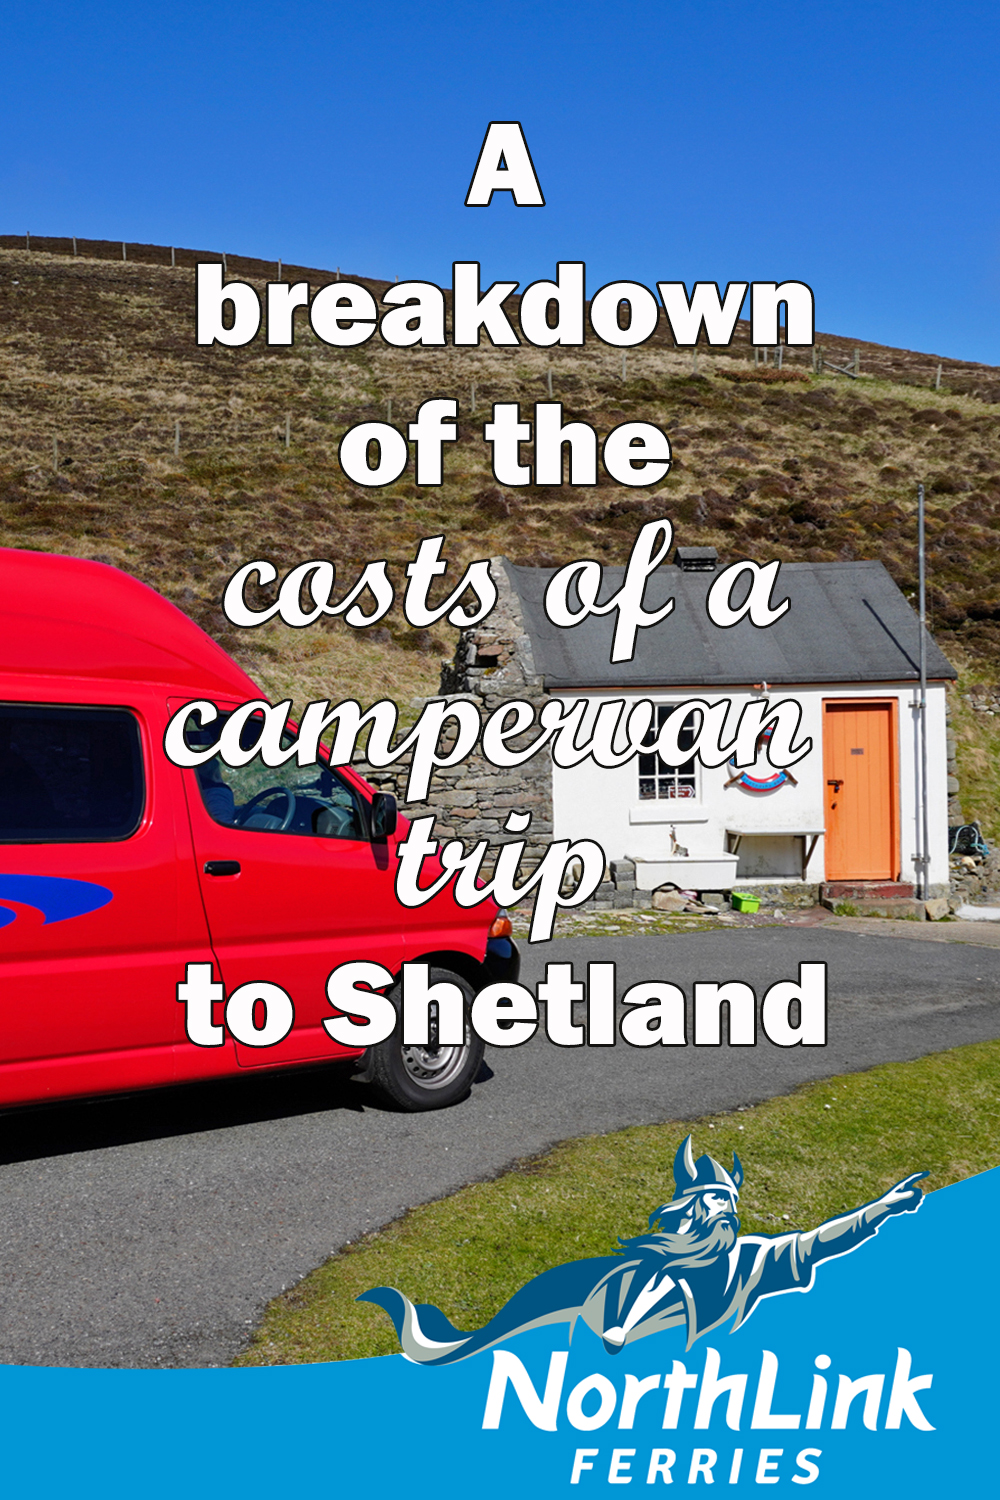 A breakdown of the costs of a campervan trip